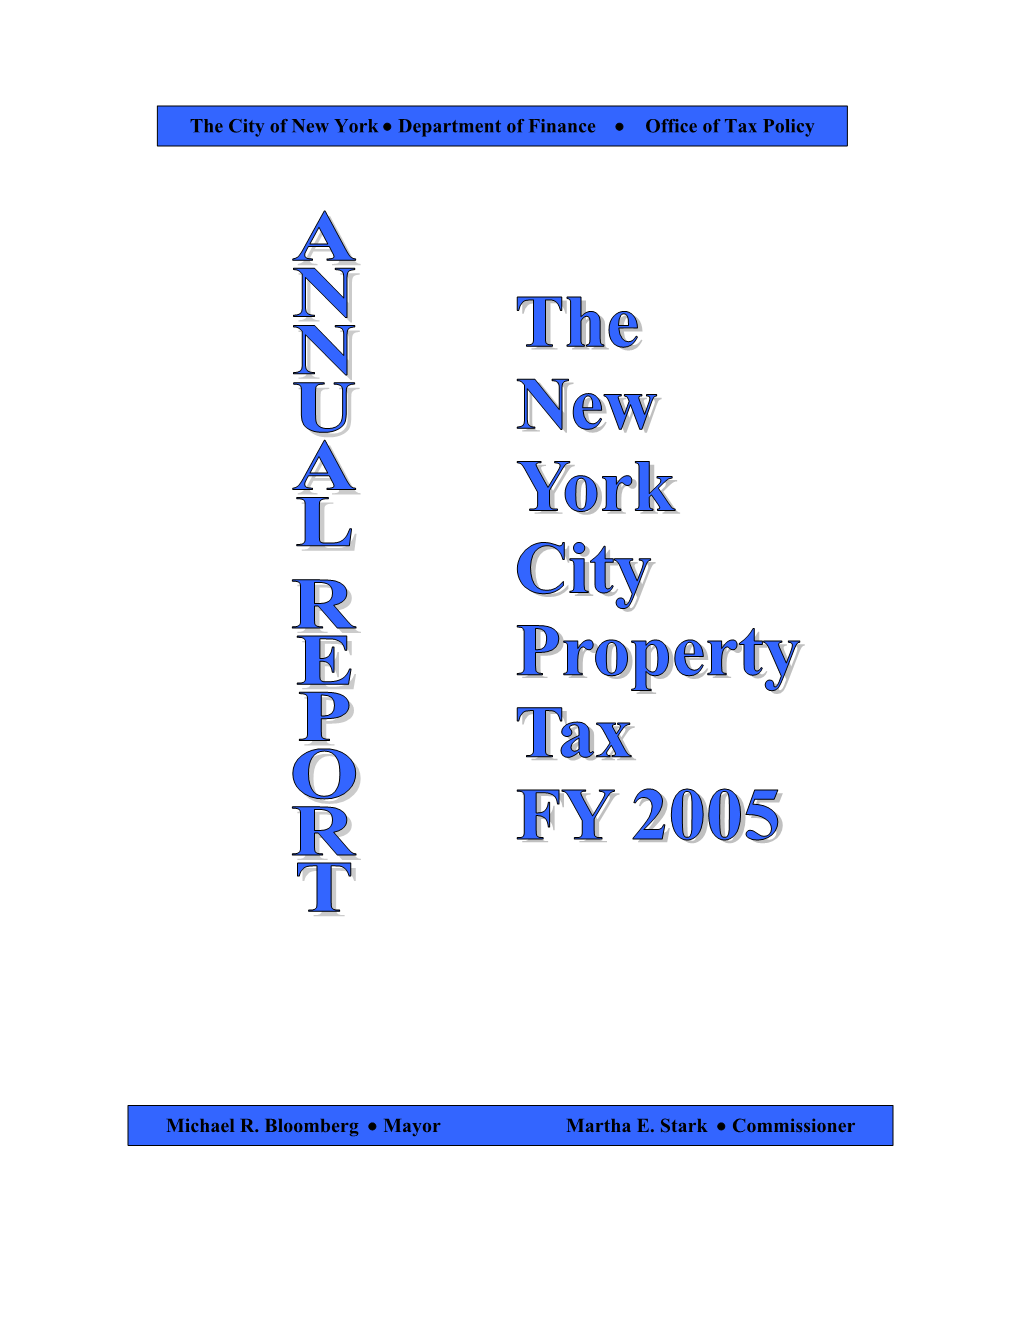 2005 Annual Report on the New York City Property